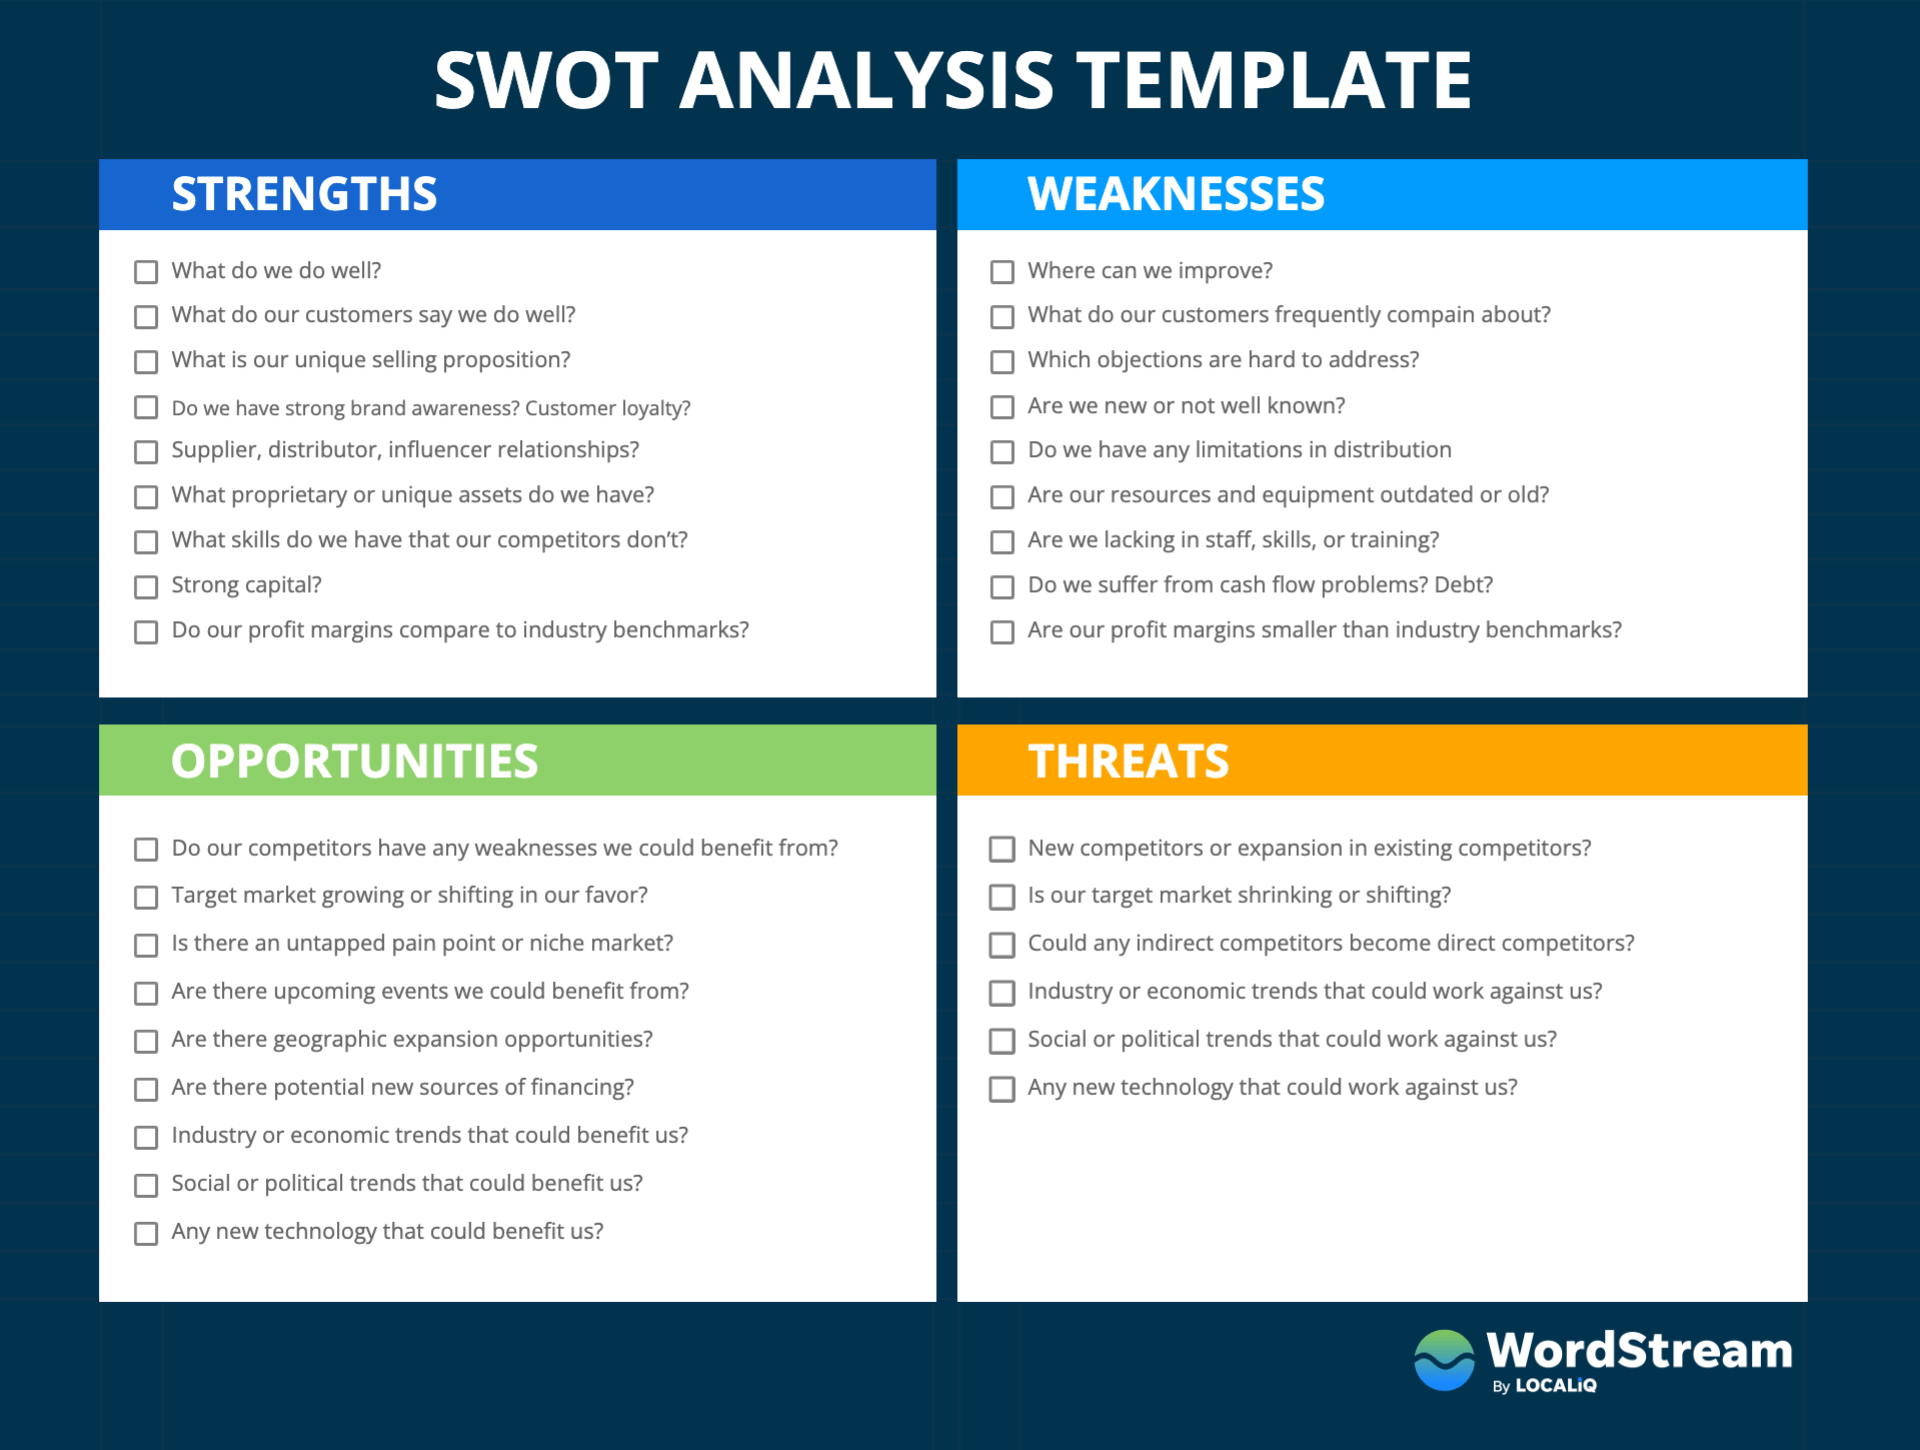 How to Do a Competitor Analysis in 7 Simple Steps (w/ Examples + Tools)